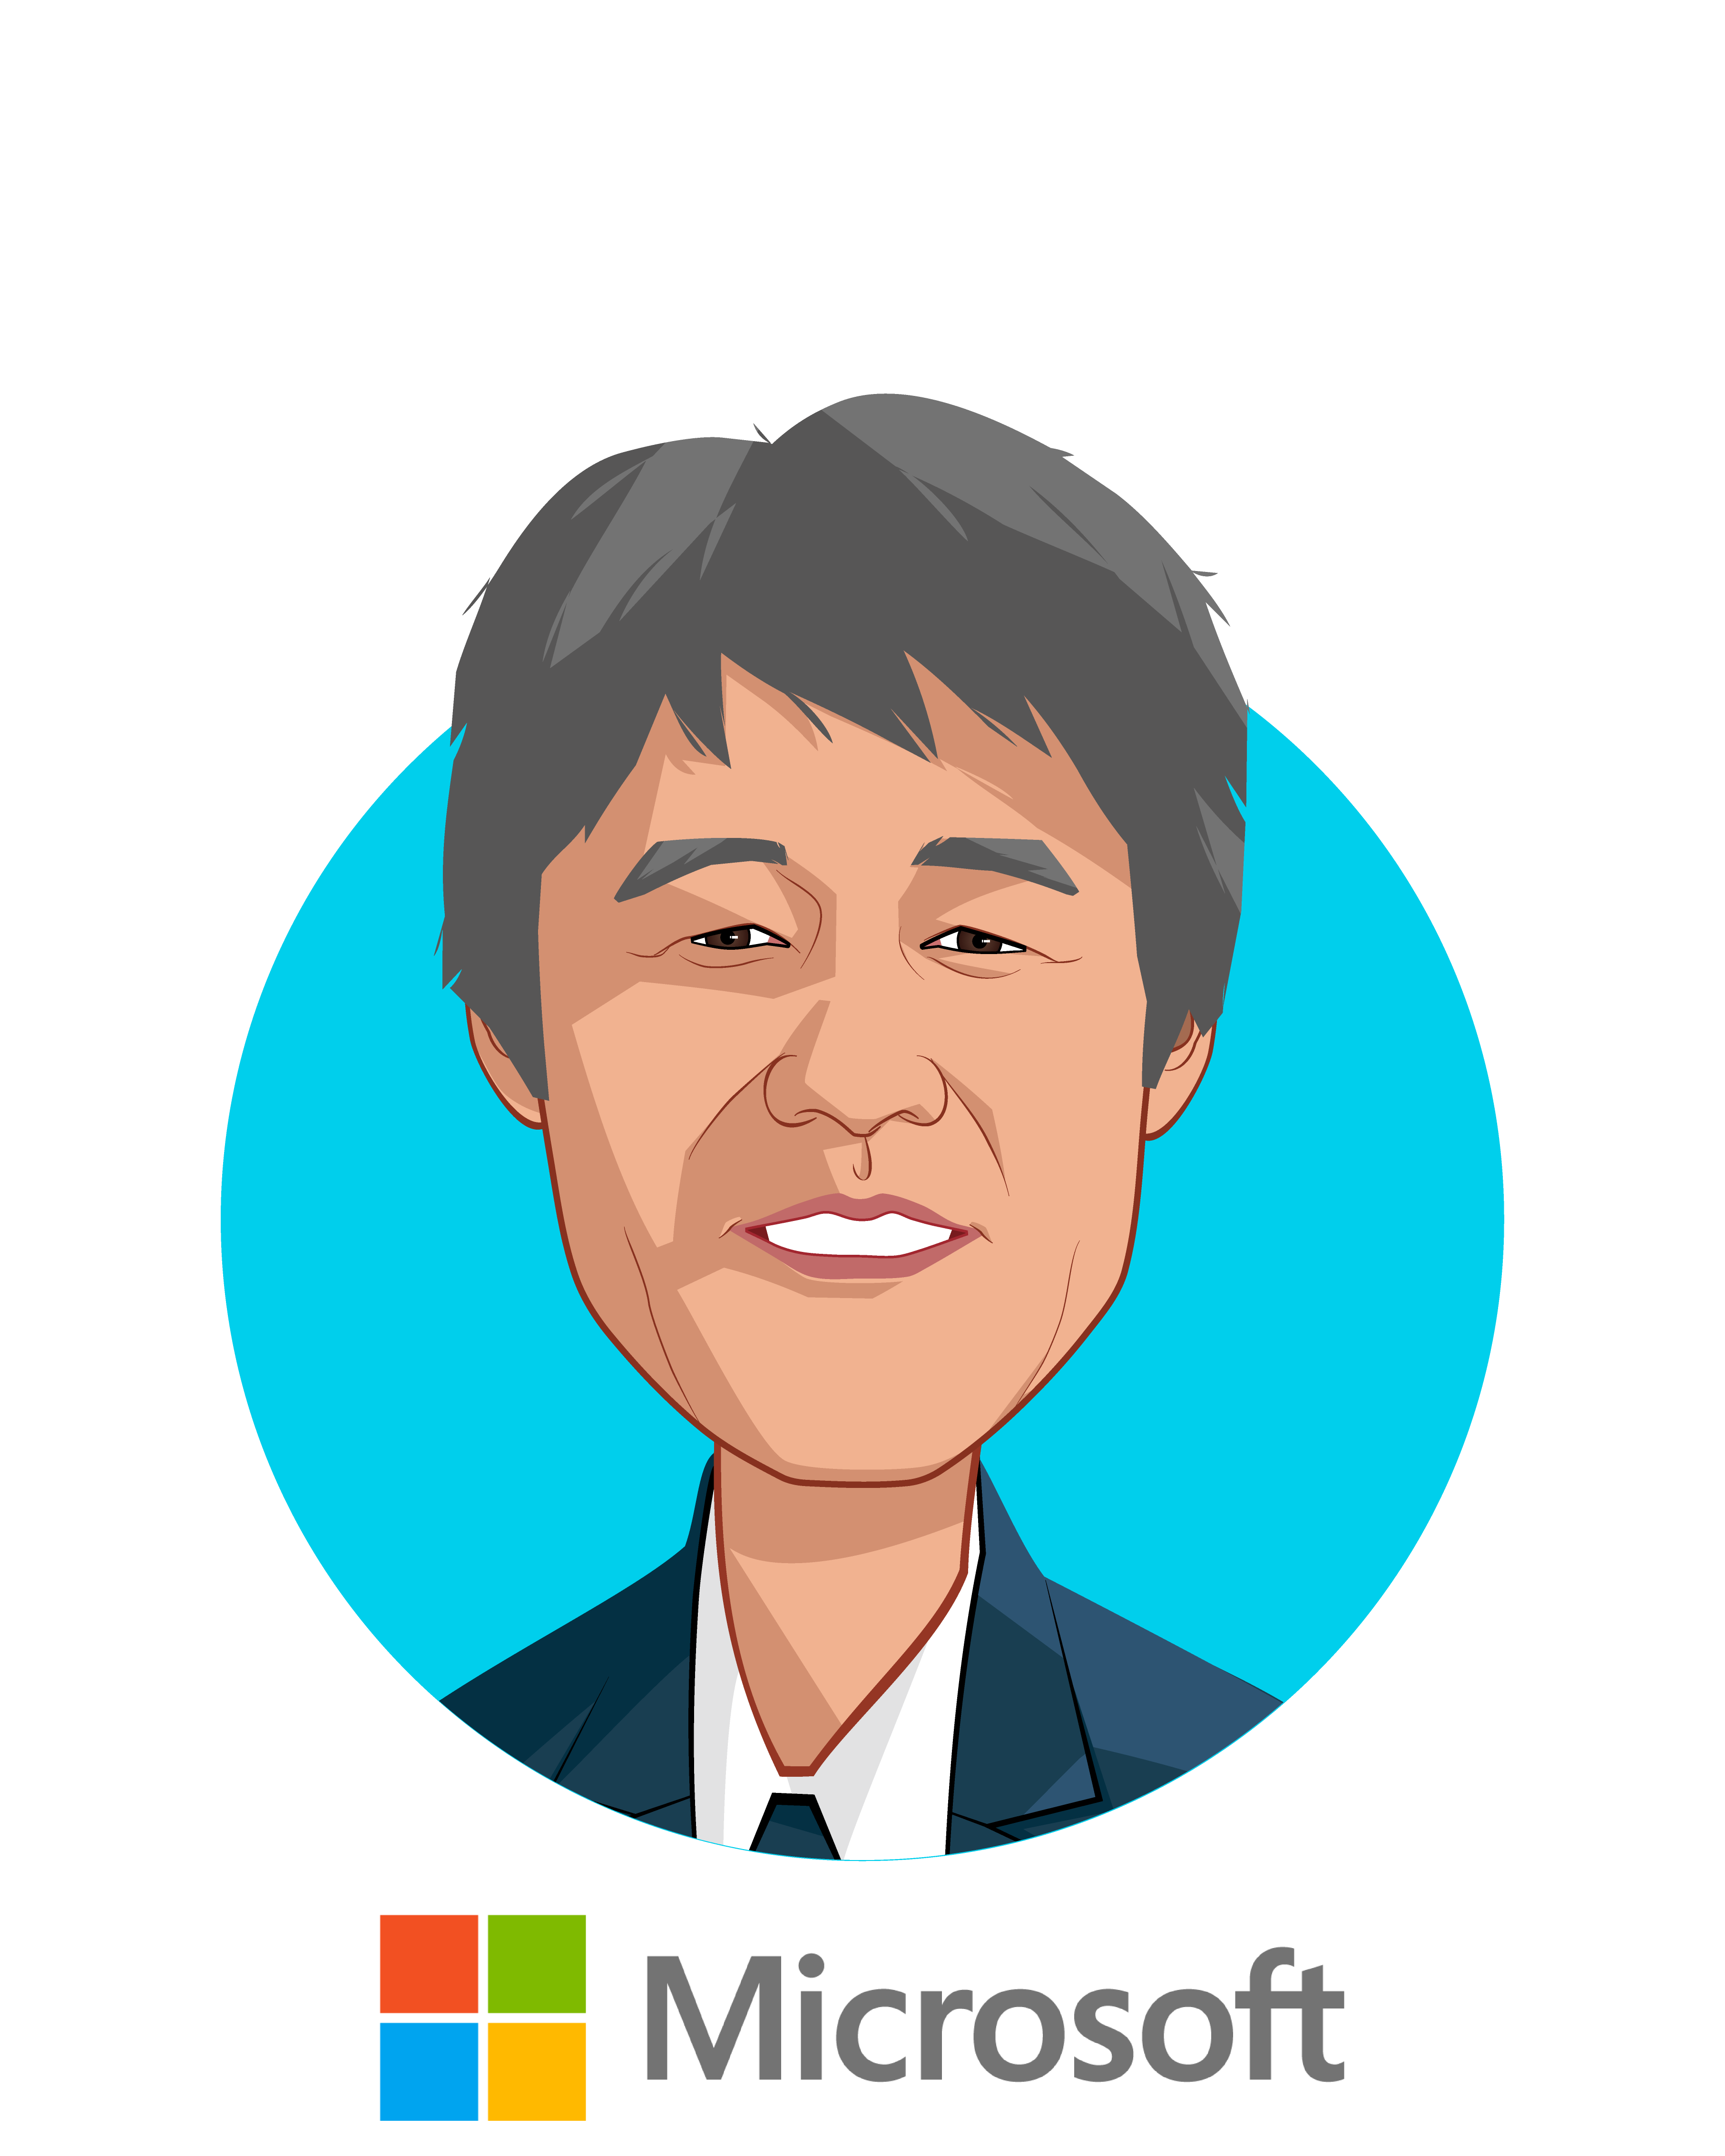 Main caricature of Dr. Peter Lee, who is speaking at HLTH and is Corporate Vice President, Microsoft Healthcare at Microsoft